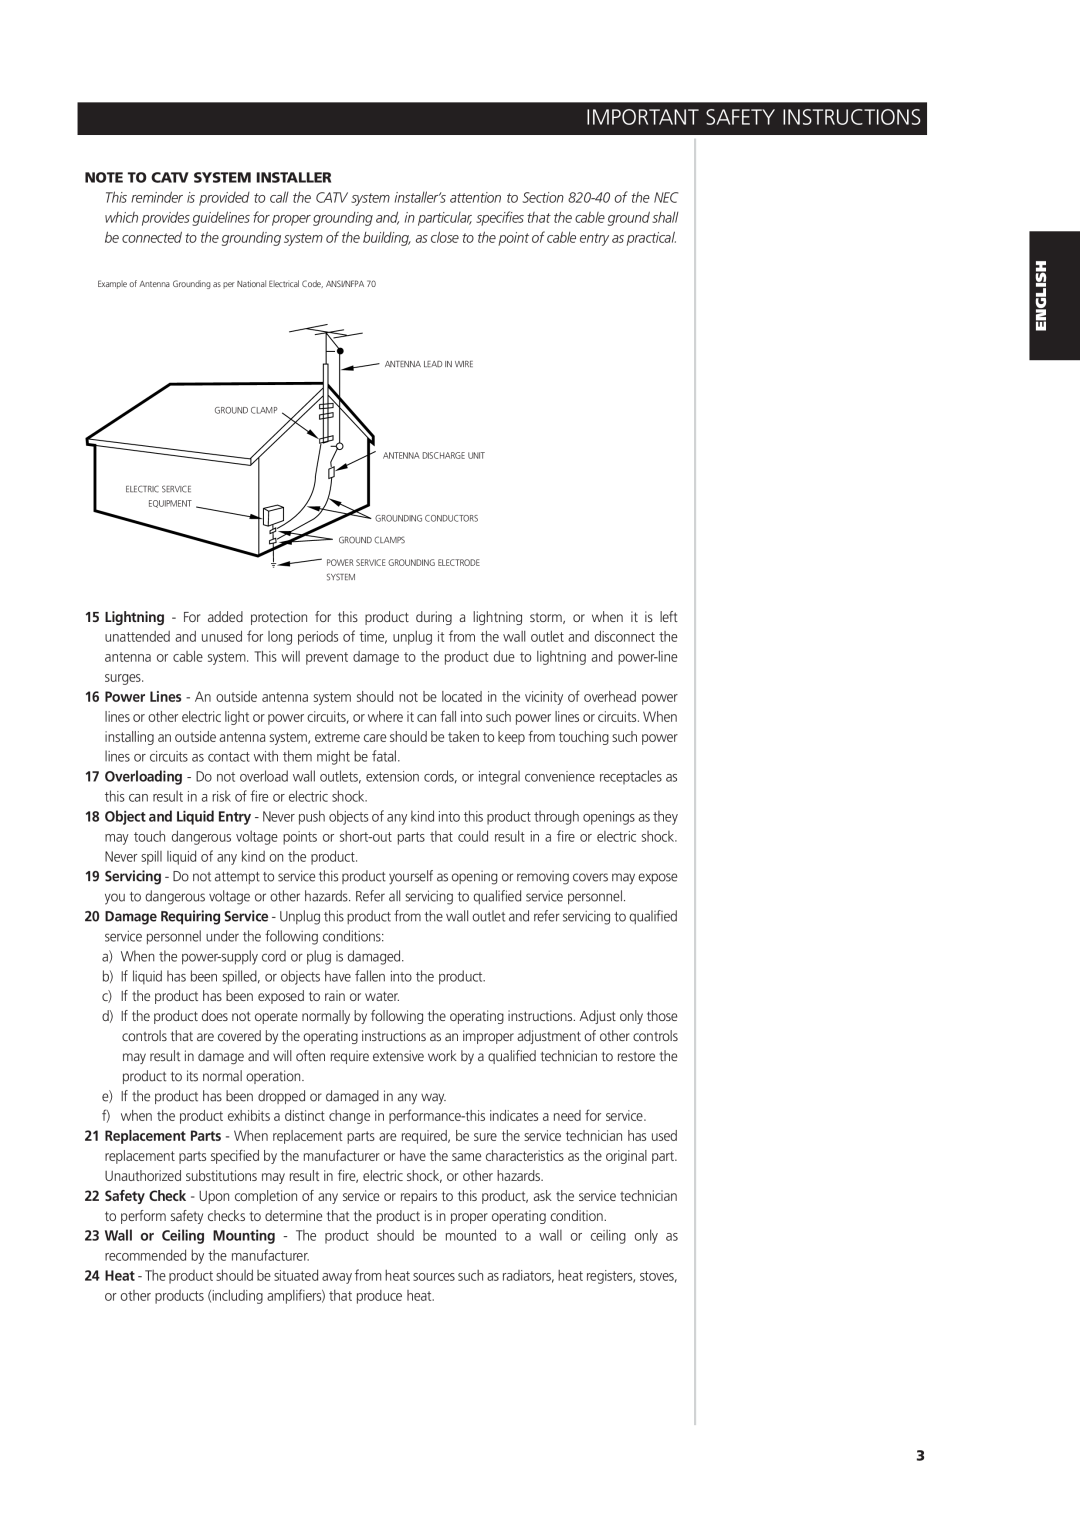 NAD L 76 owner manual Note To Catv System Installer, Important Safety Instructions 